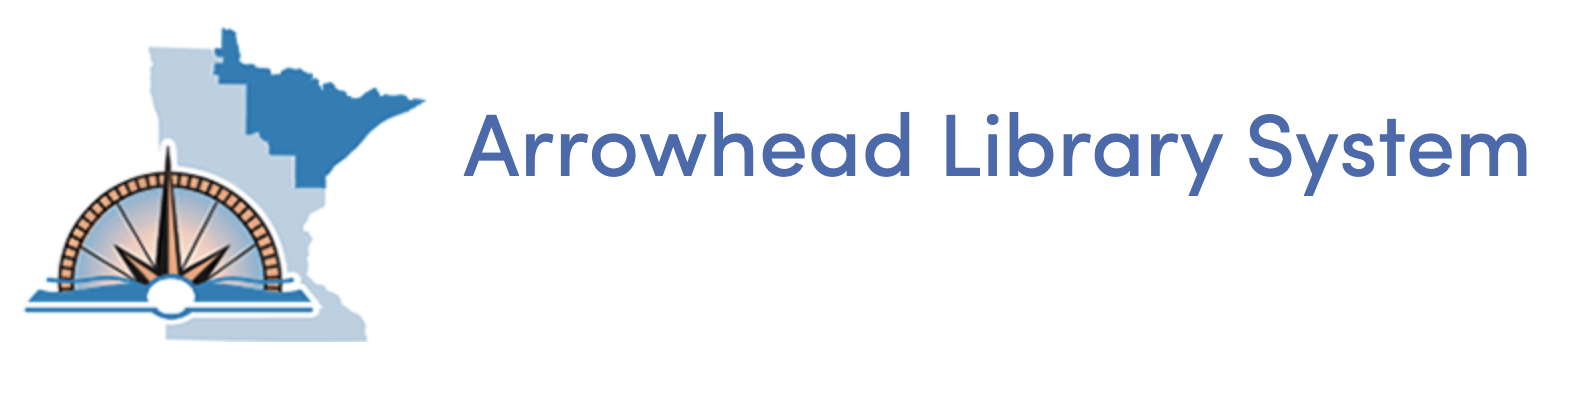 The logo for the Arrowhead Library System